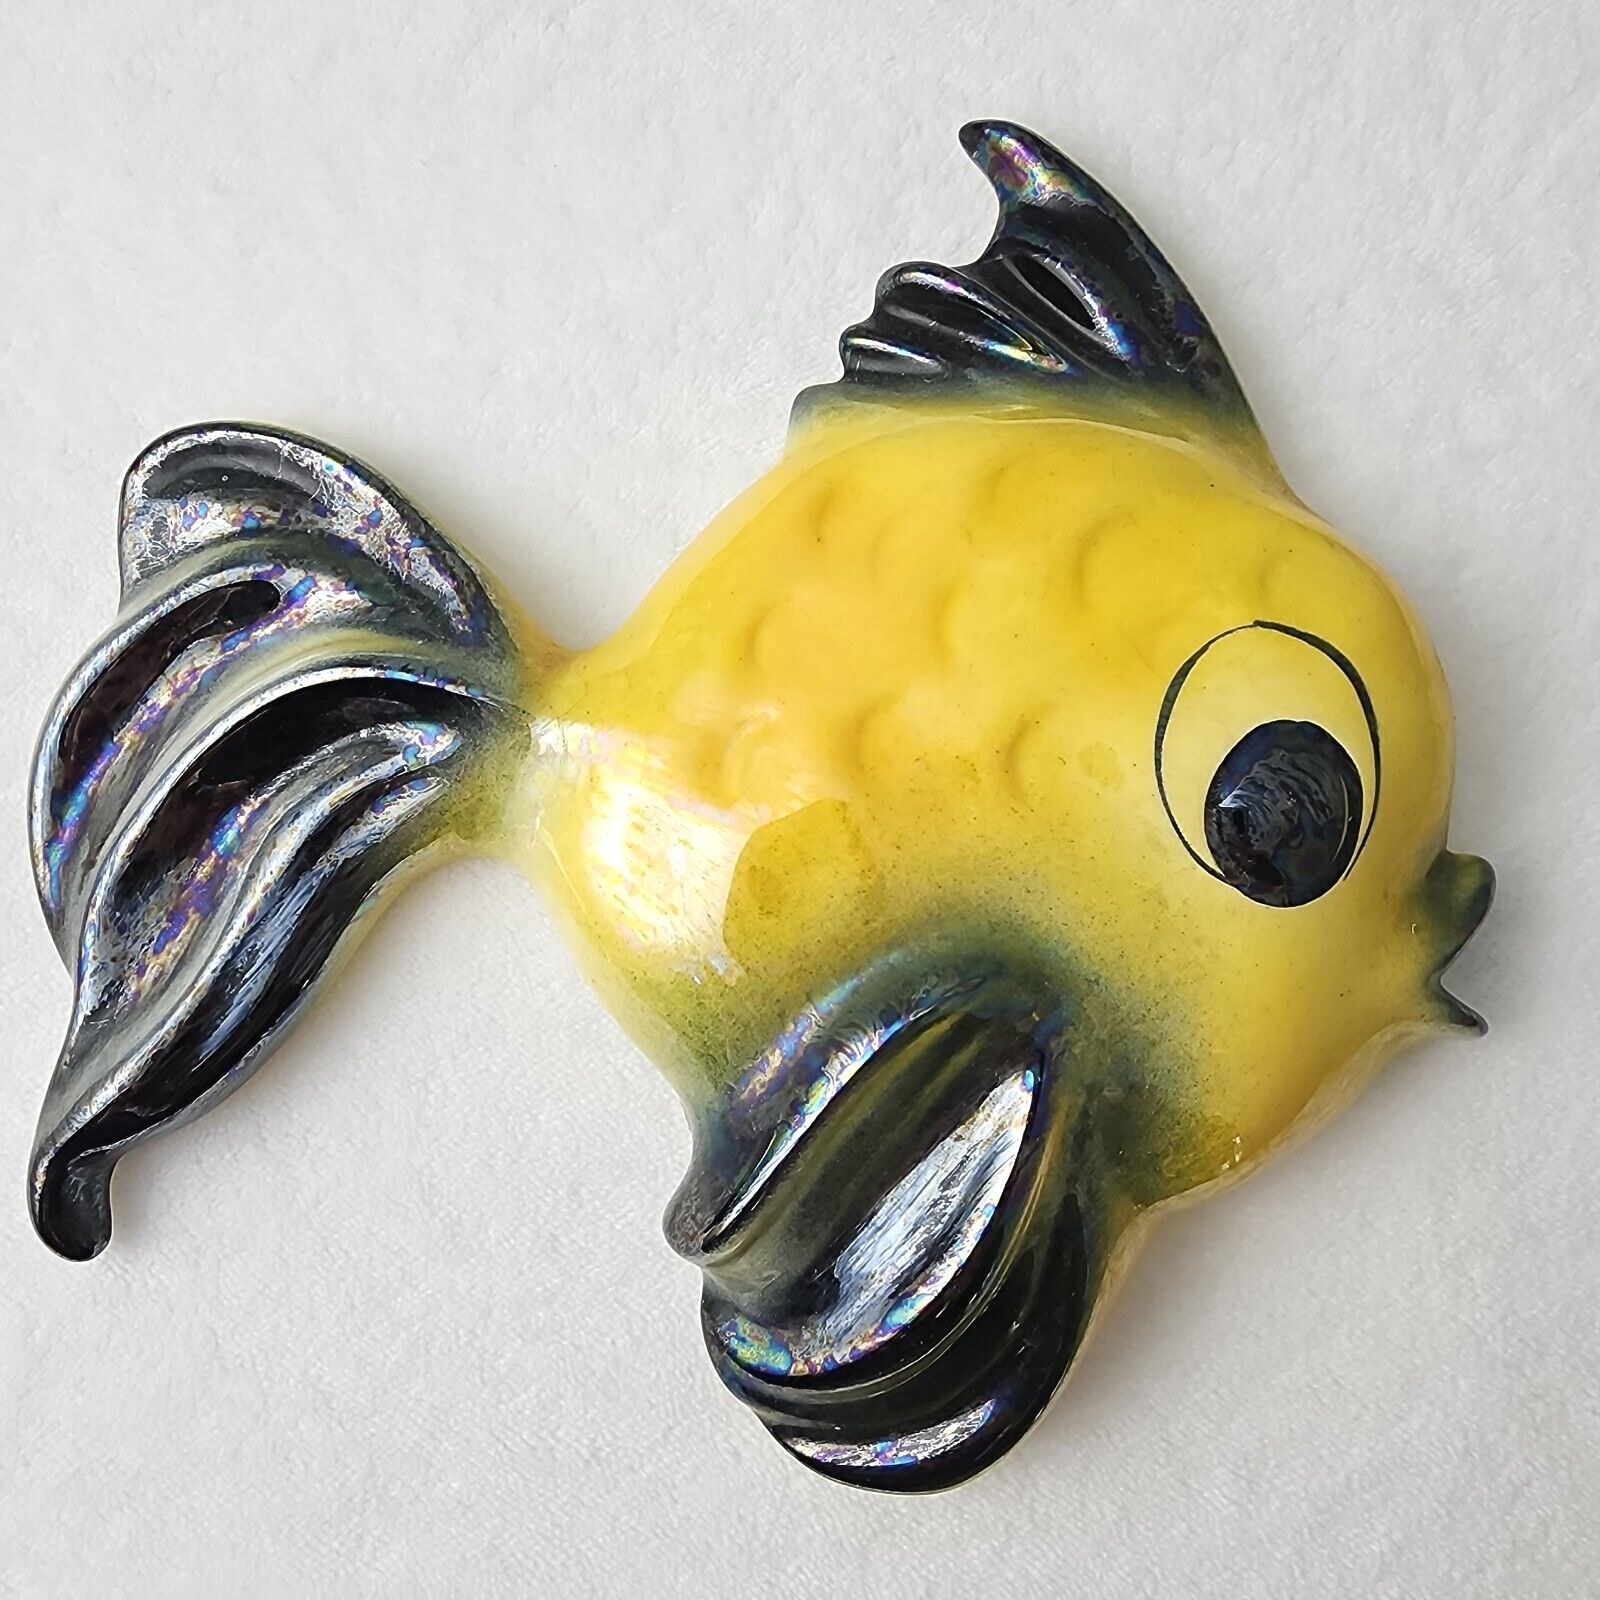 Ceramicraft California 1950's Wall Fish Yellow & Black Vintage With Tail Repair